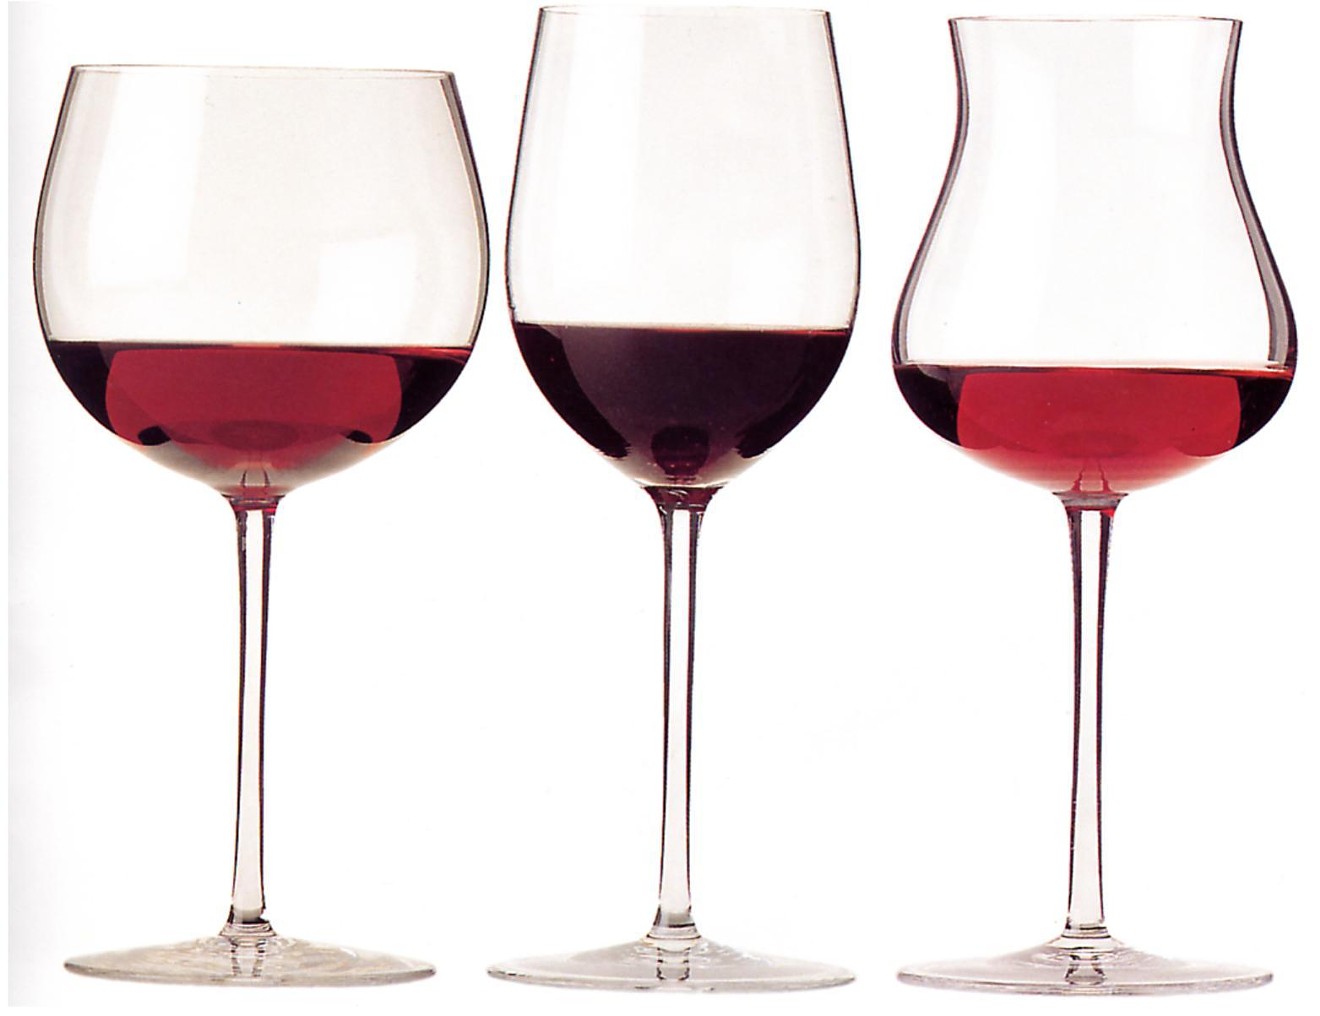 wine-glasses-with-red-wine.jpg